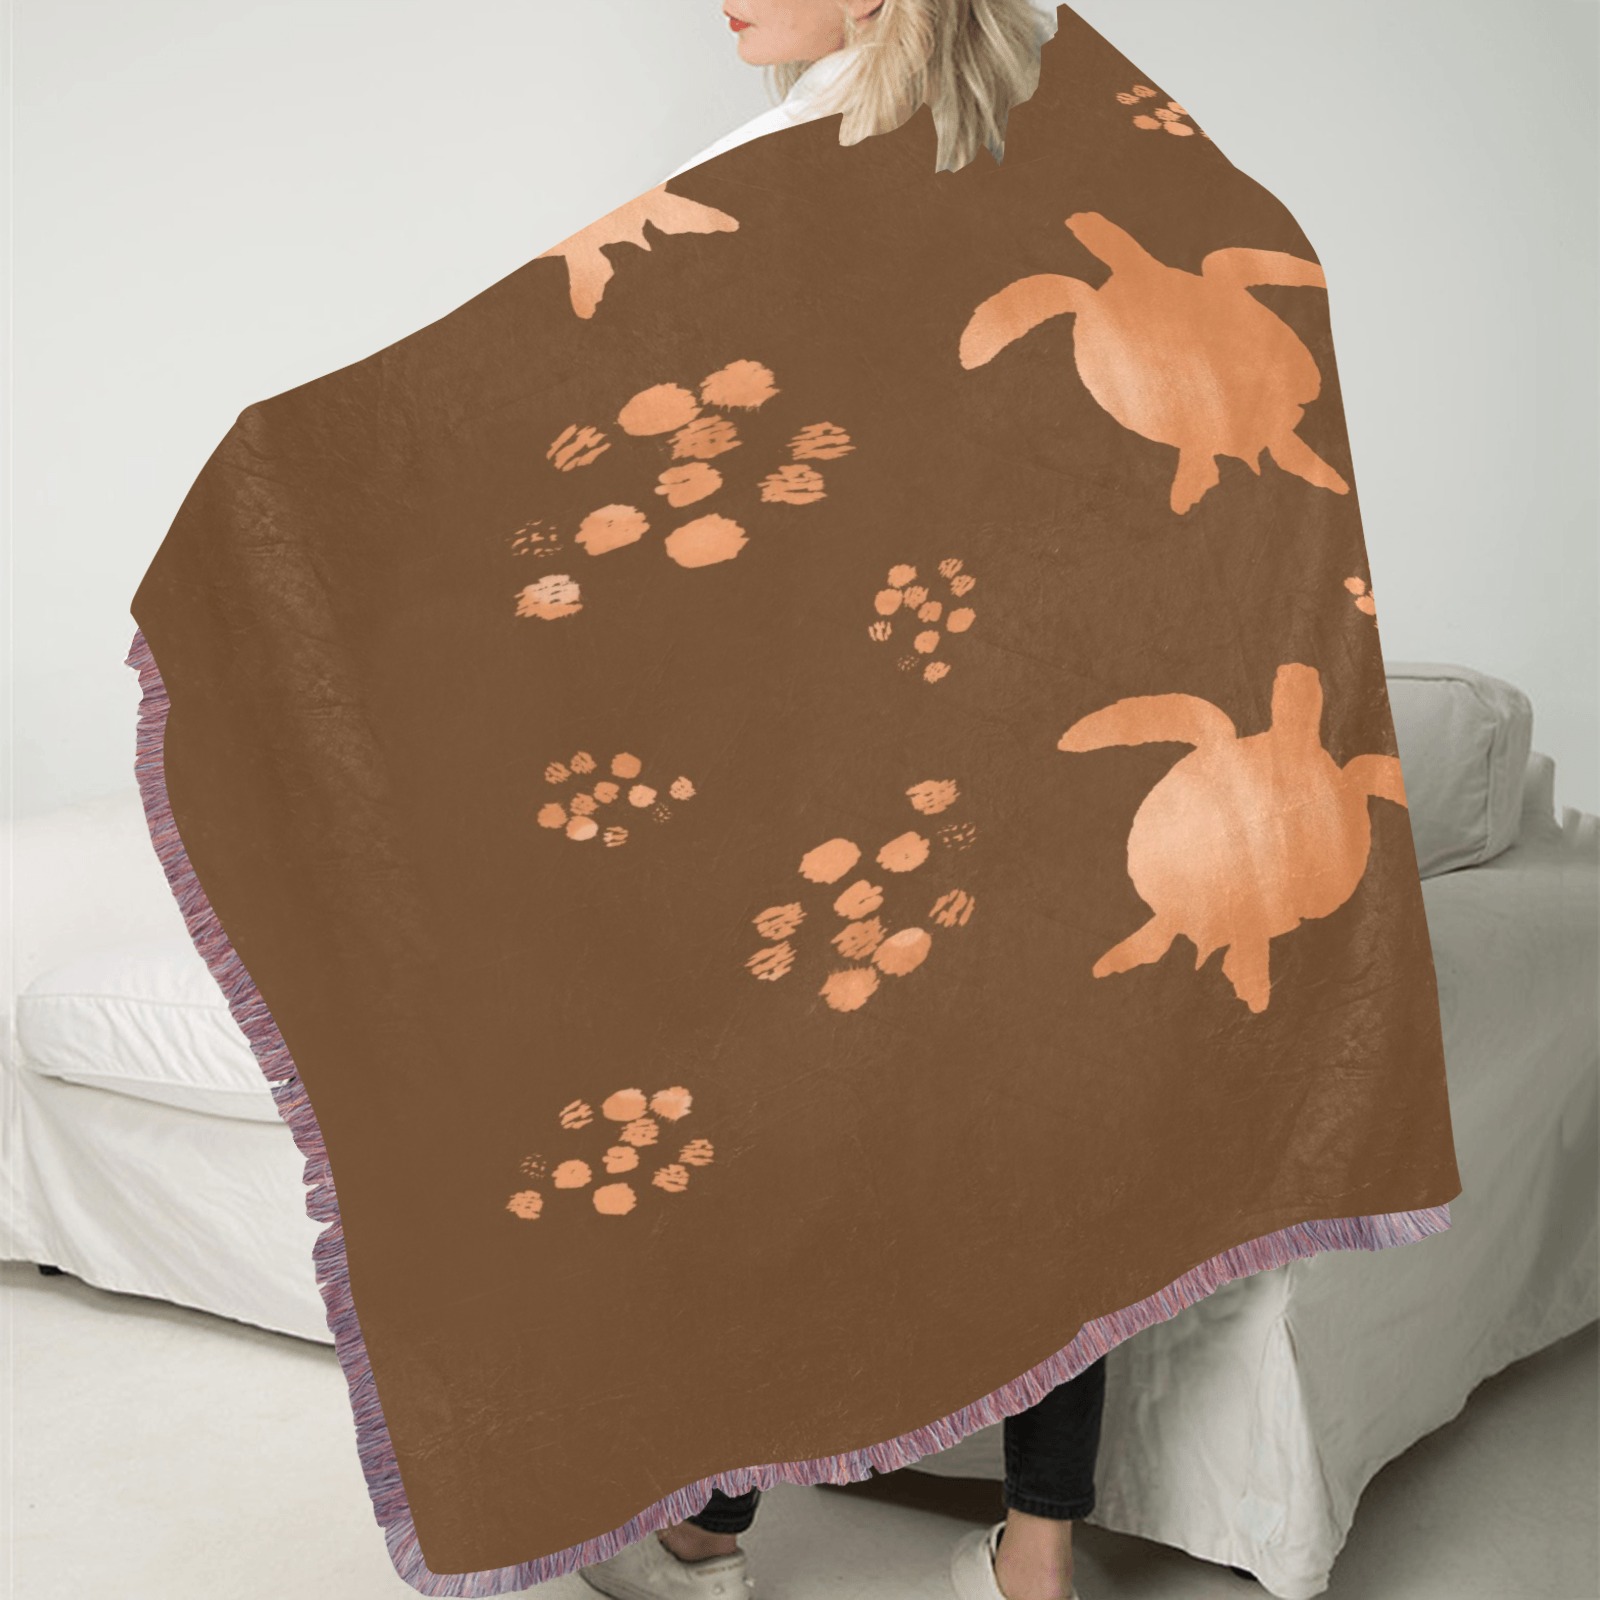 Sea turtles on Brown Ultra-Soft Fringe Blanket 60"x80" (Mixed Pink)